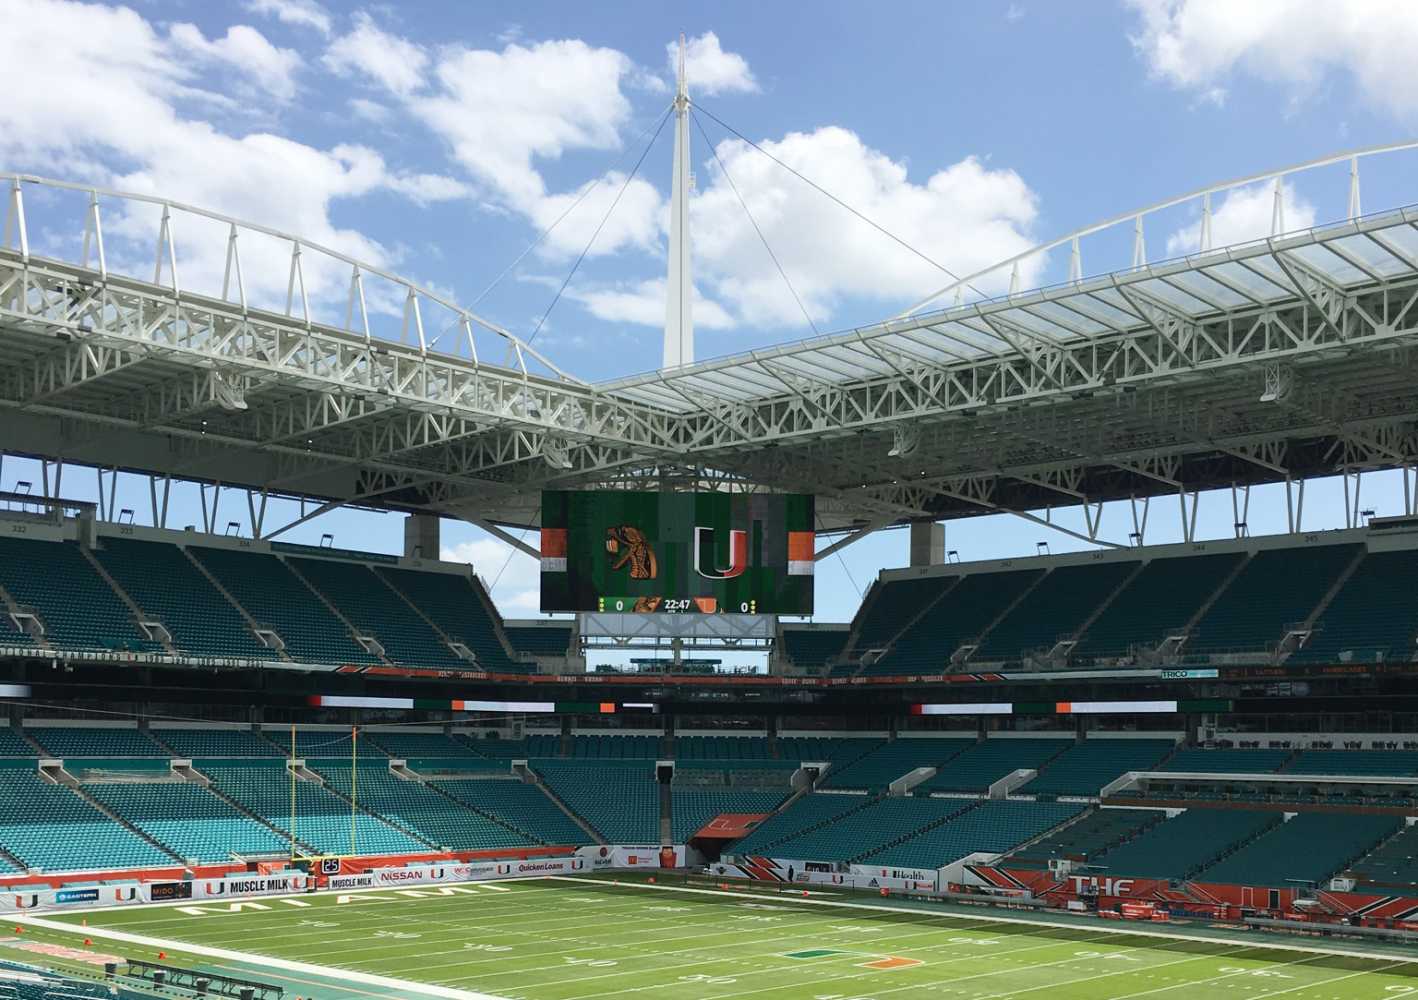 Hard Rock Stadium hosts University of Miami football and major entertainment events throughout the year